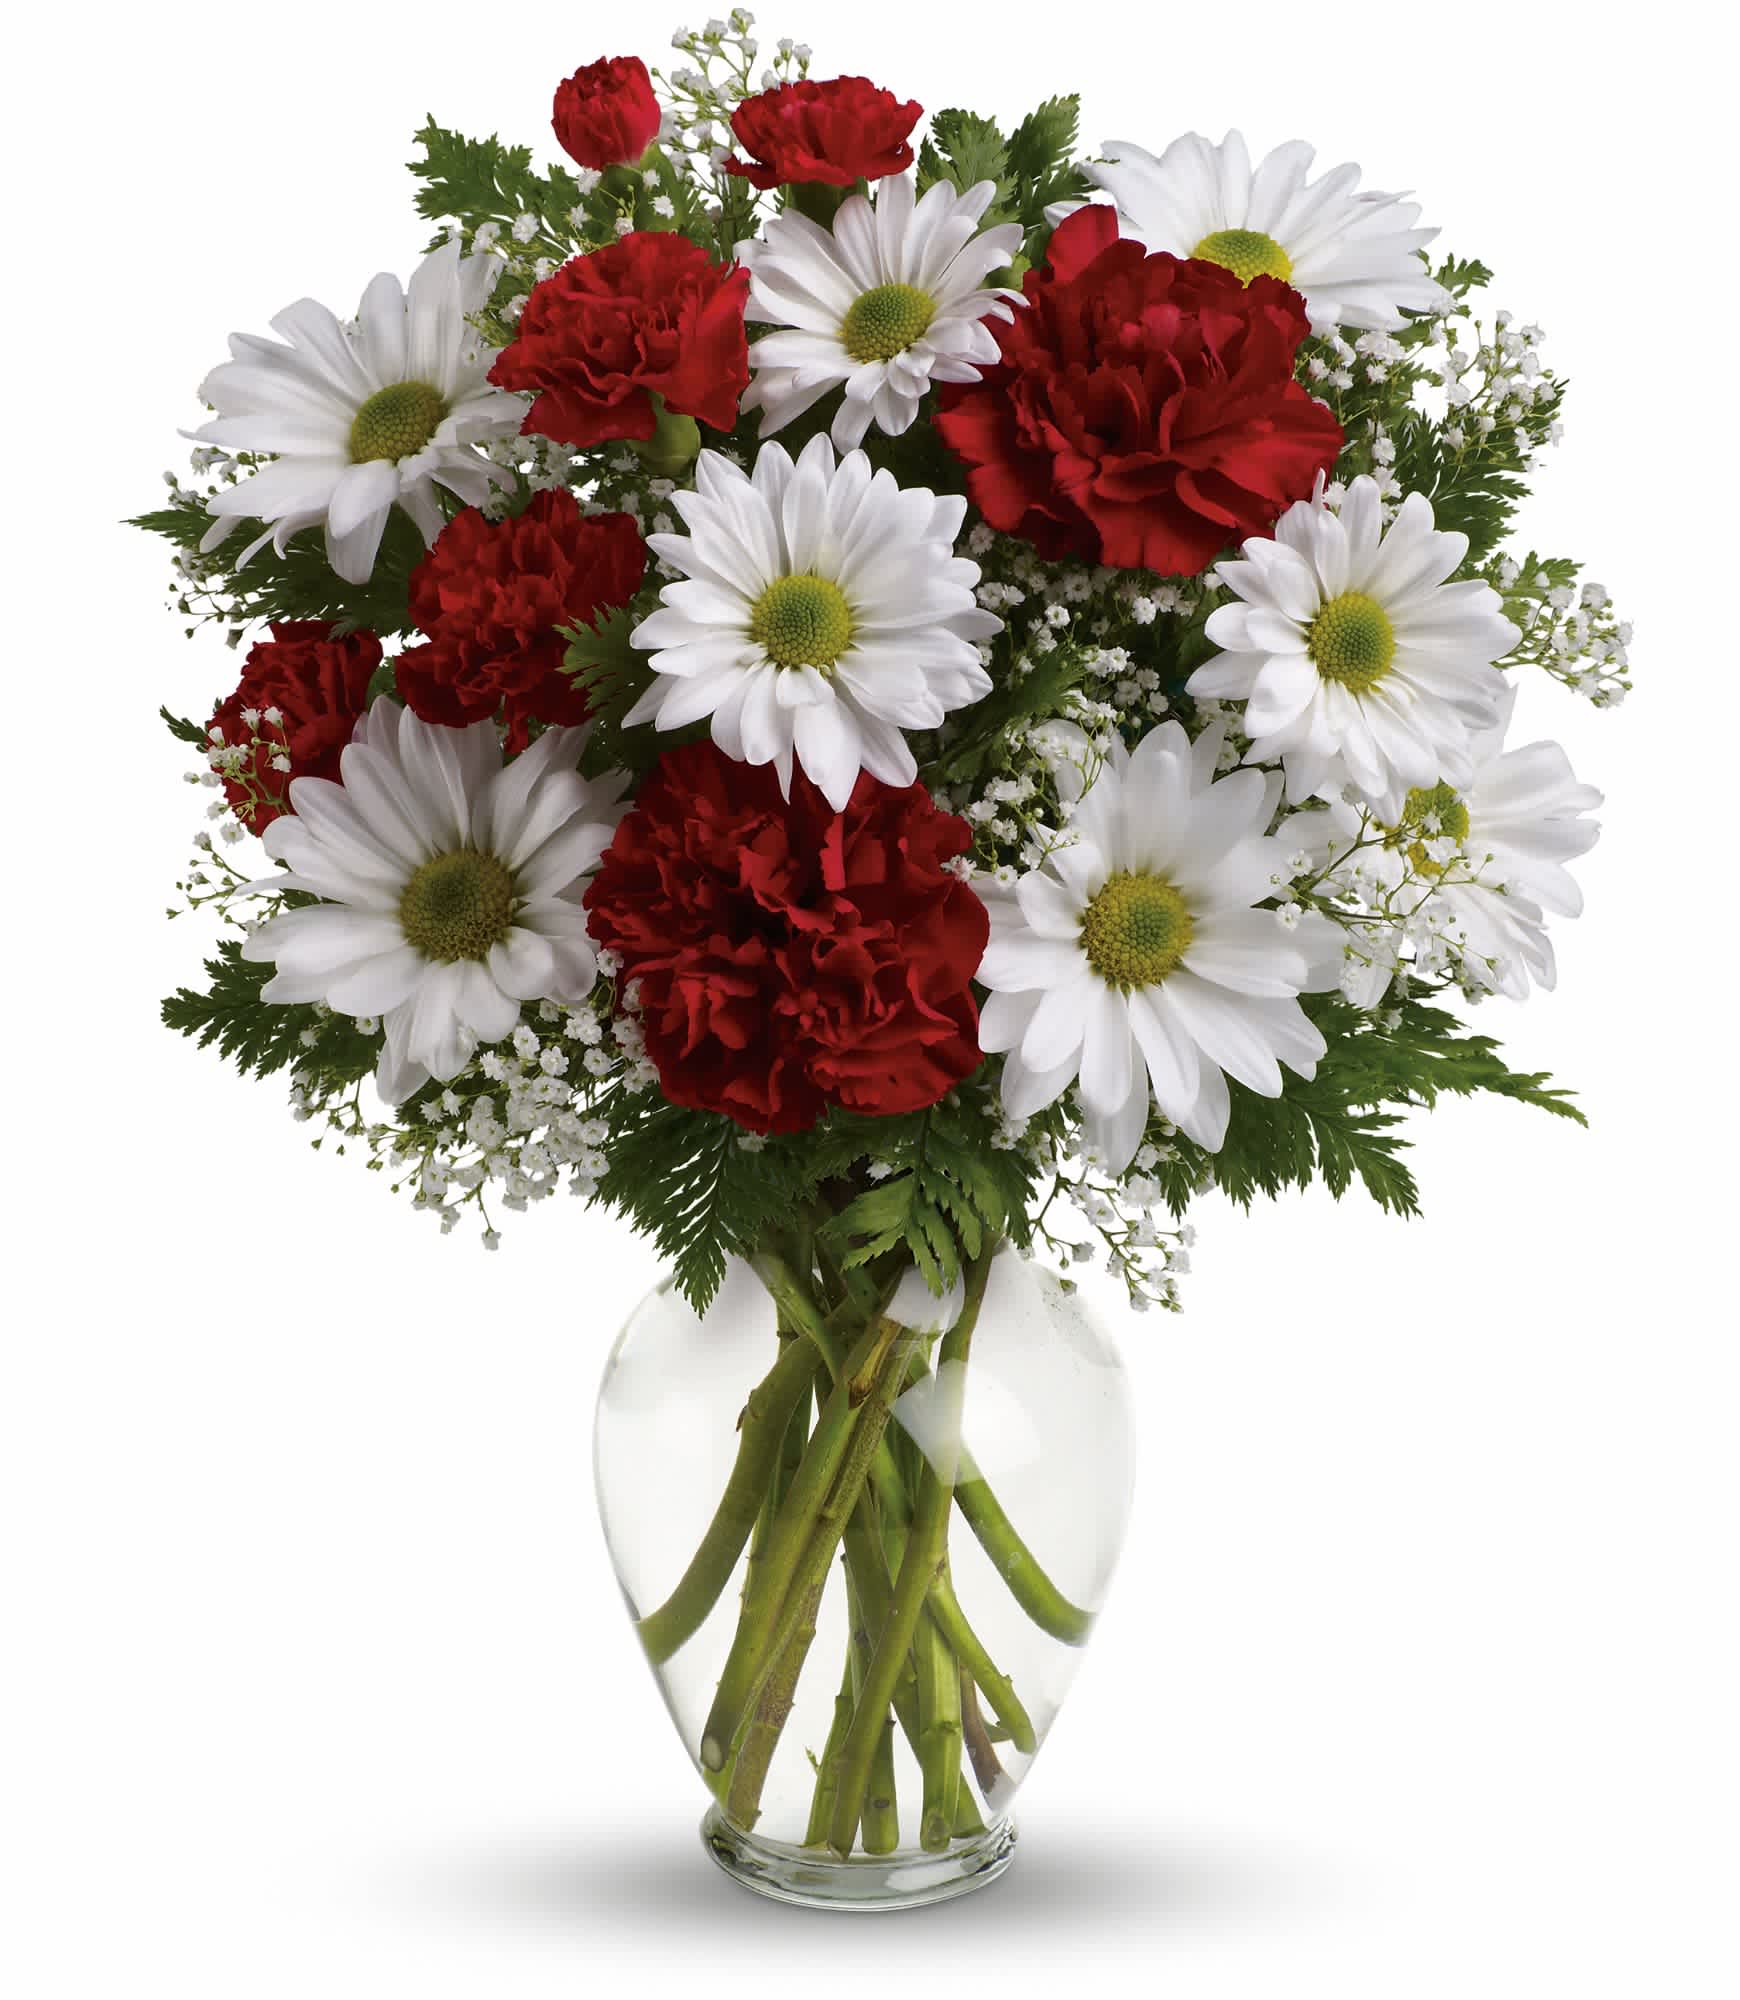 Kindest Heart Bouquet by Teleflora - A special show of kindness, on Valentine's Day or any day of the year! This eye-catching arrangement of red carnations, white daisies and delicate baby's breath will surprise and delight your special someone - and remain a treasured memory for years to come.